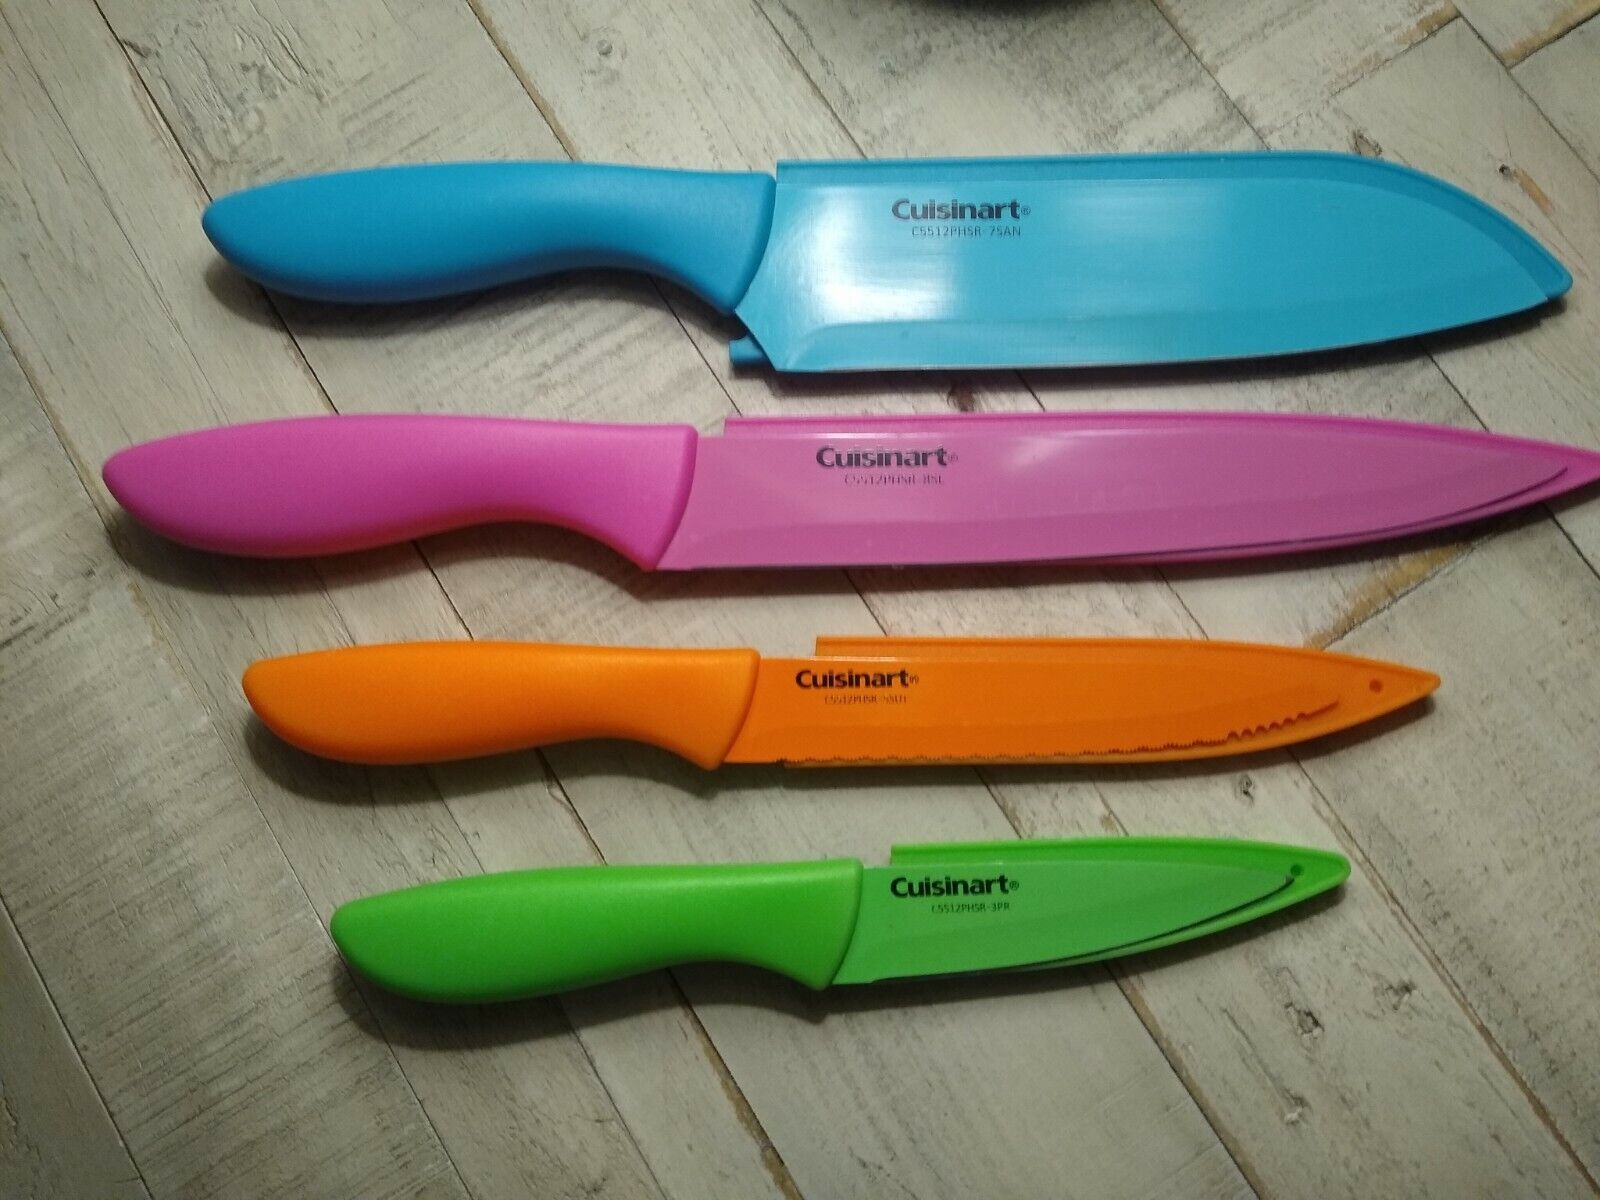 Cuisinart 8-Piece Ceramic Coated Color Knife Set with Blade Guards